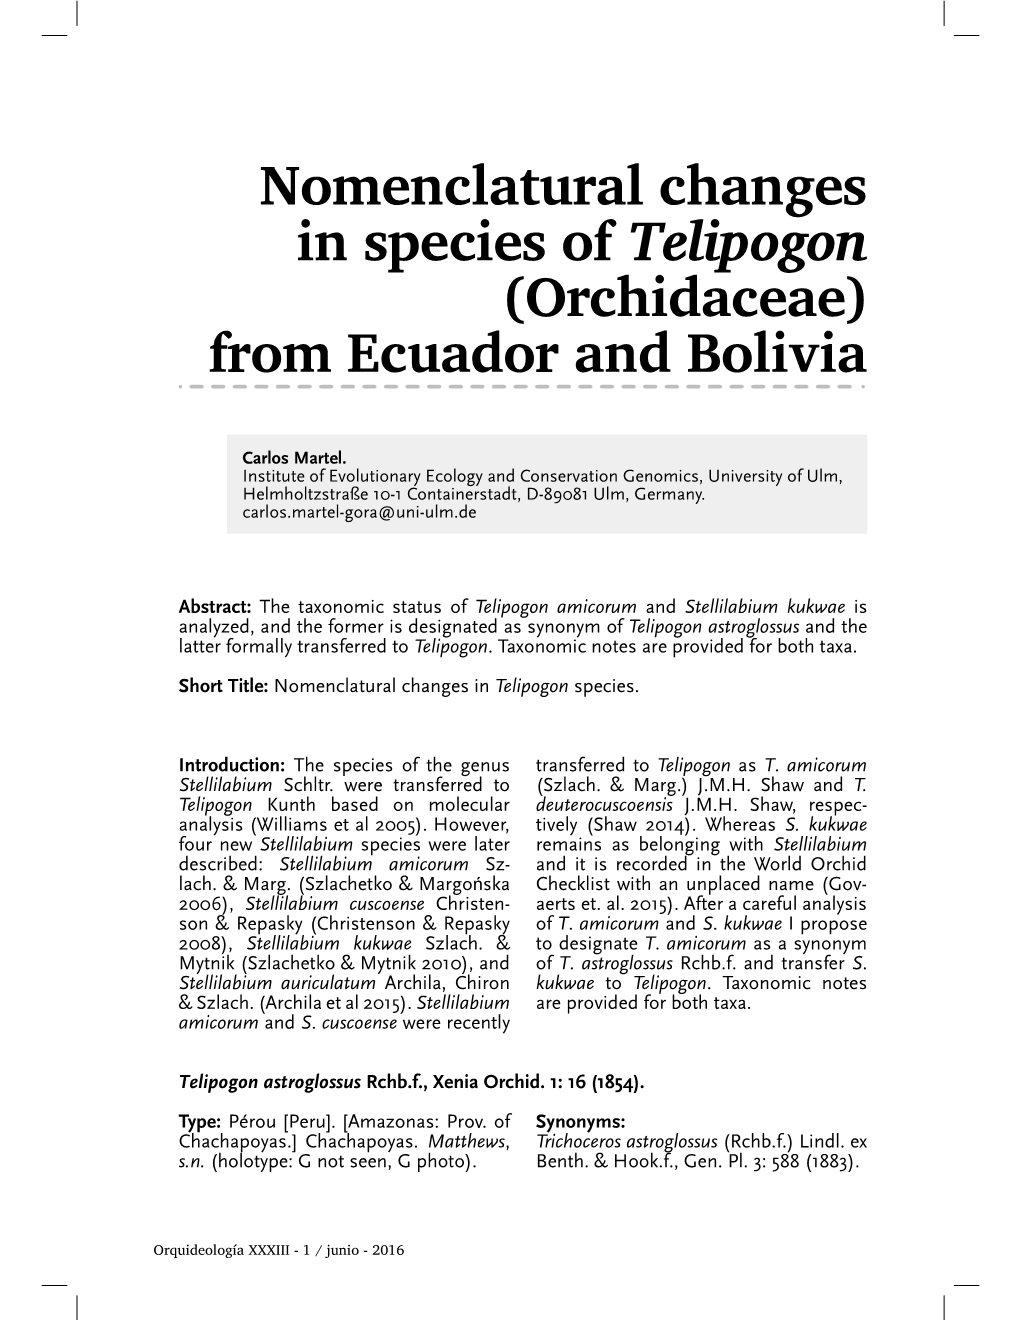 Nomenclatural Changes in Species of Telipogon (Orchidaceae) from Ecuador and Bolivia